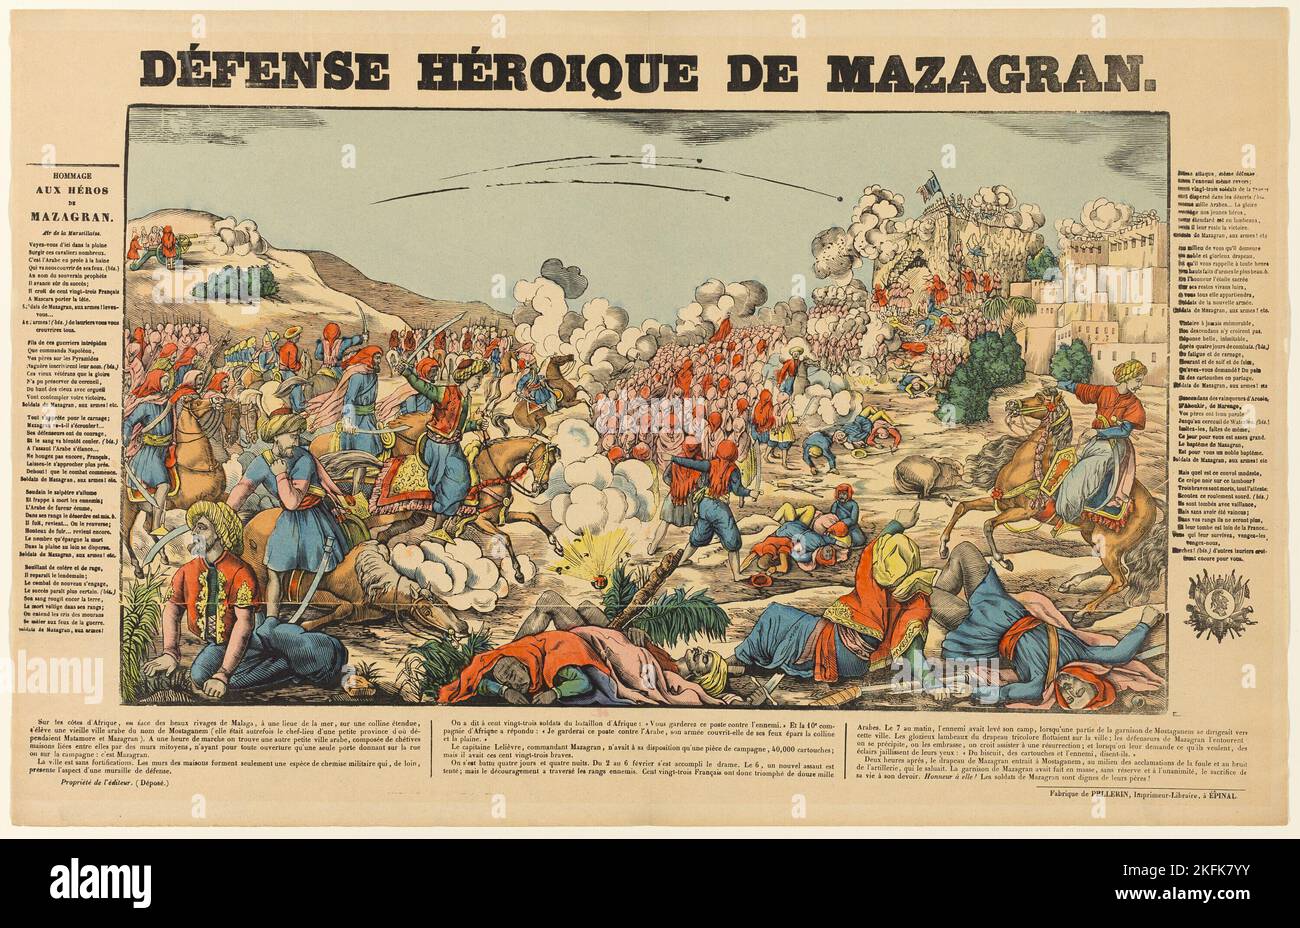 Heroic Defense of Mazagran, early 19th century. 'D&#xe9;fense H&#xe9;roique de Mazagran'. The Battle of Mazagran, 1840 - Arab and Berber forces against French troops during the French conquest of Algeria. Stock Photo